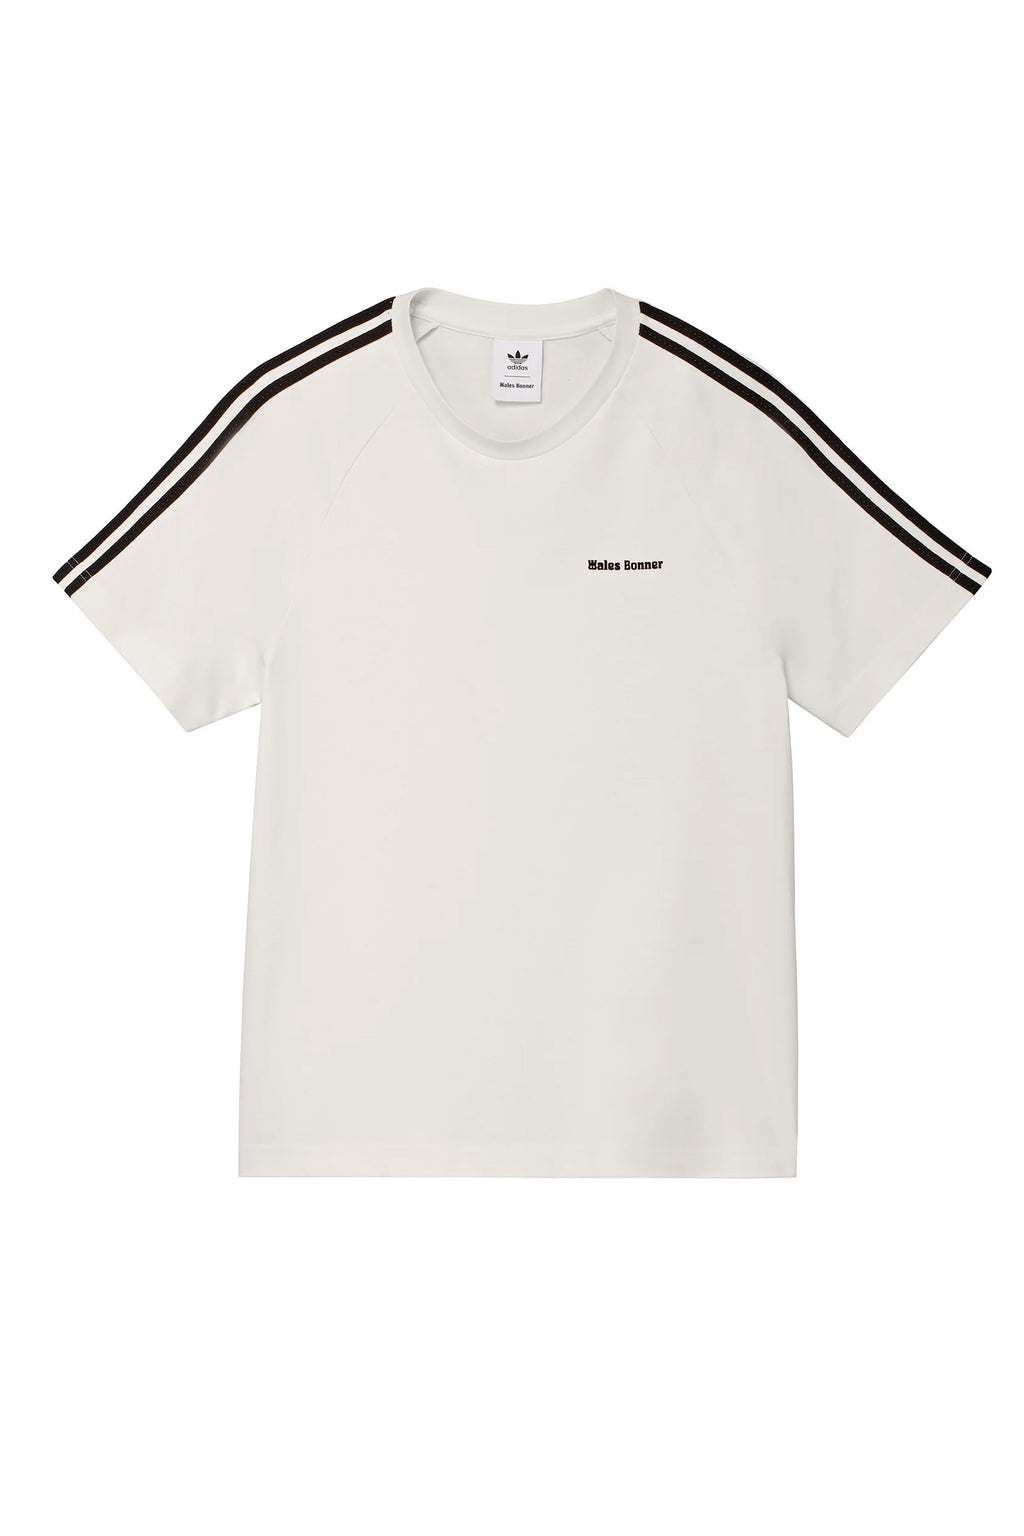 ADIDAS ORIGINALS BY WALES NUBIAN FW23 TEE - / S/S WHT WB BONNER